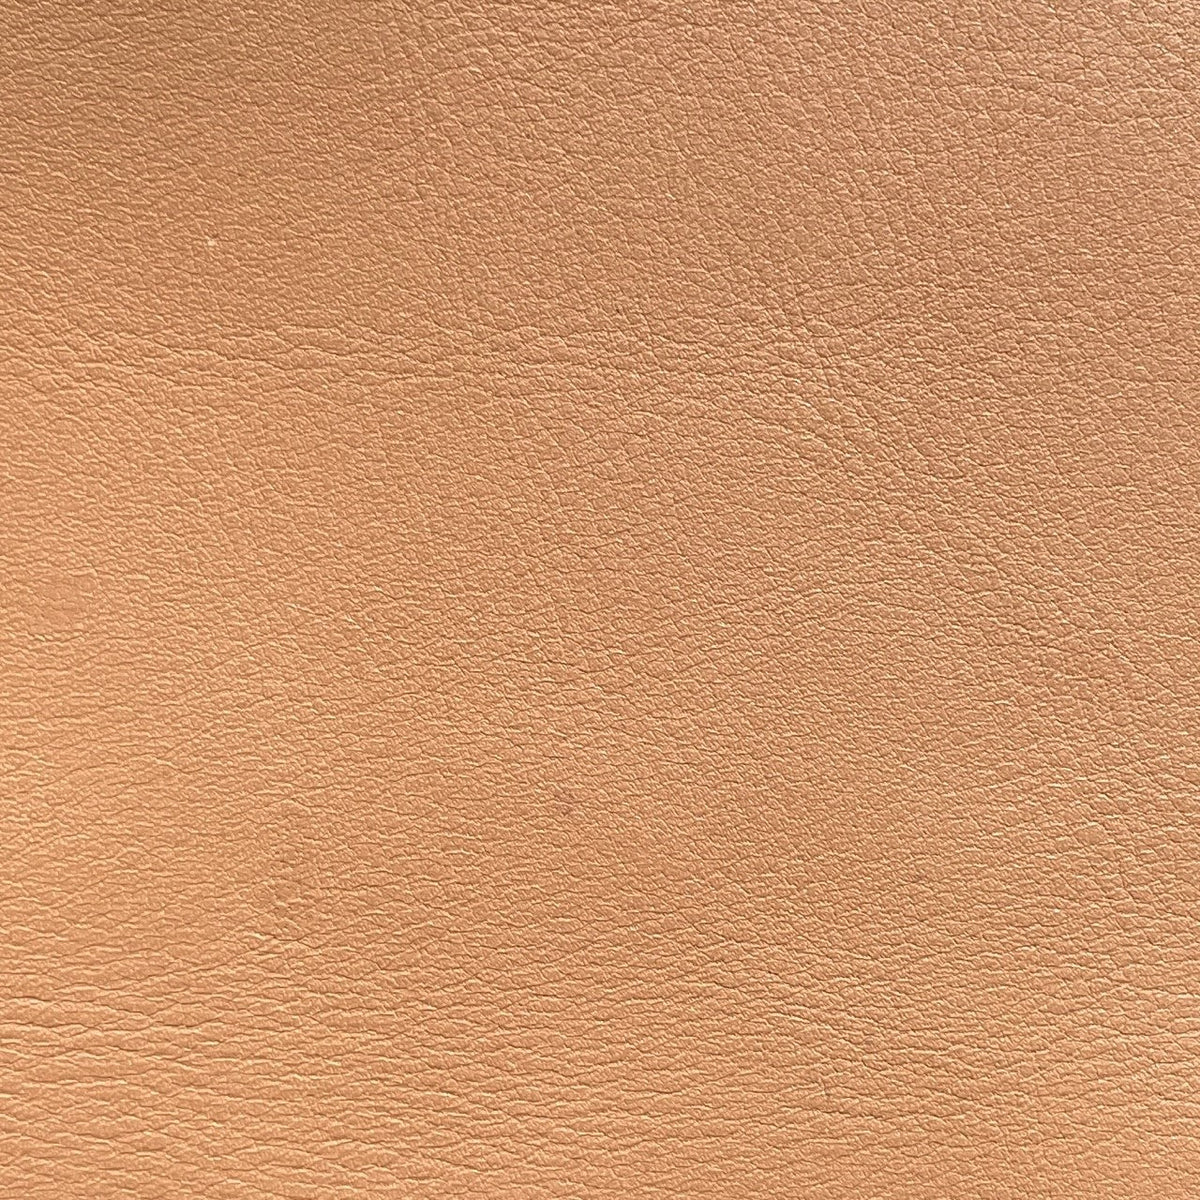 Olympia Cow Half Sides | Hazelnut | 1.5 mm | 10.5 sq.ft | From $160 ea.